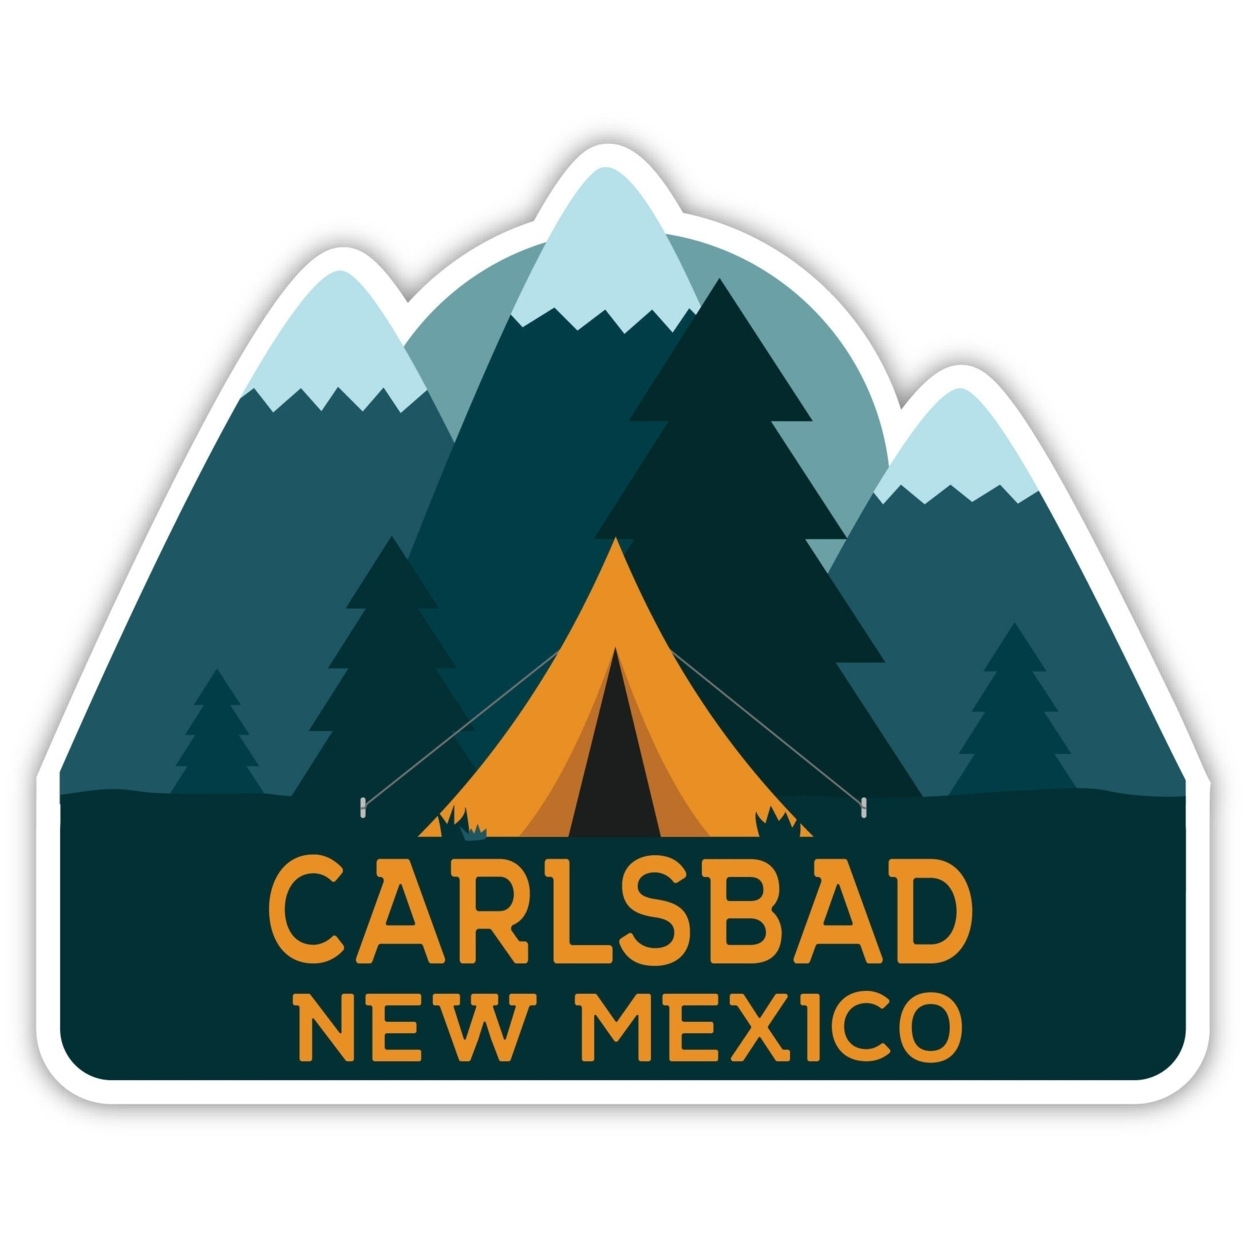 Carlsbad New Mexico Souvenir Decorative Stickers (Choose Theme And Size) - Single Unit, 8-Inch, Tent